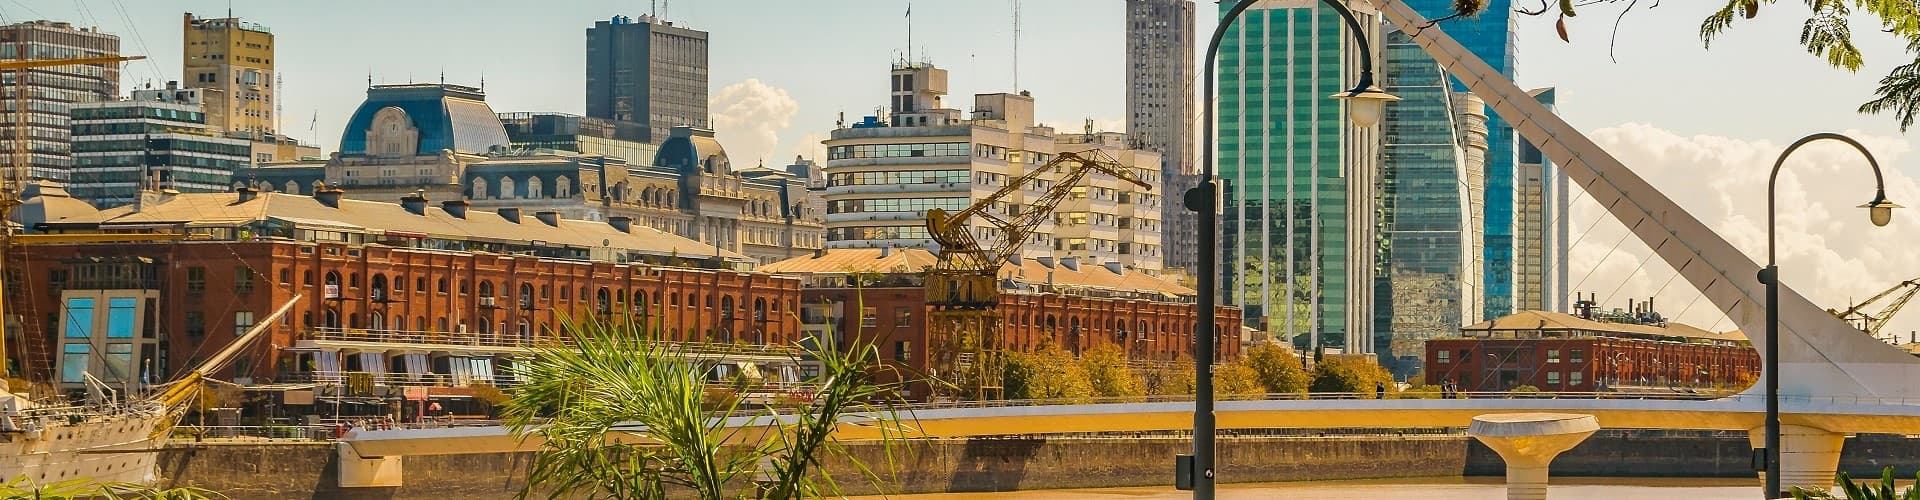 Free Film Locations Tour Buenos Aires Banner